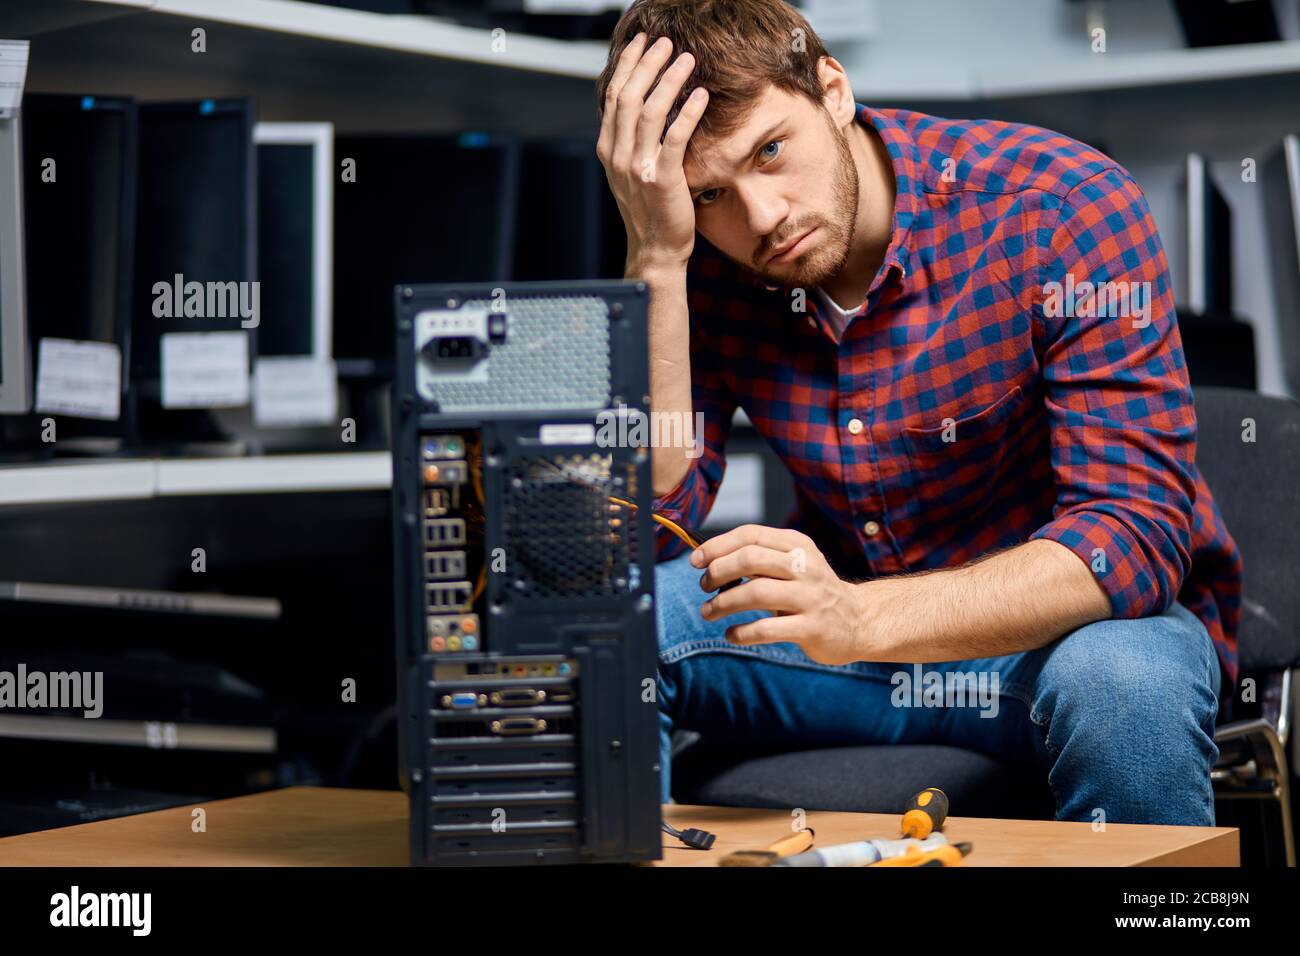 IT technician dressed in stylish shirt and jeans holding his forehead and repairing broken pc computer. close up photo. Stock Photo